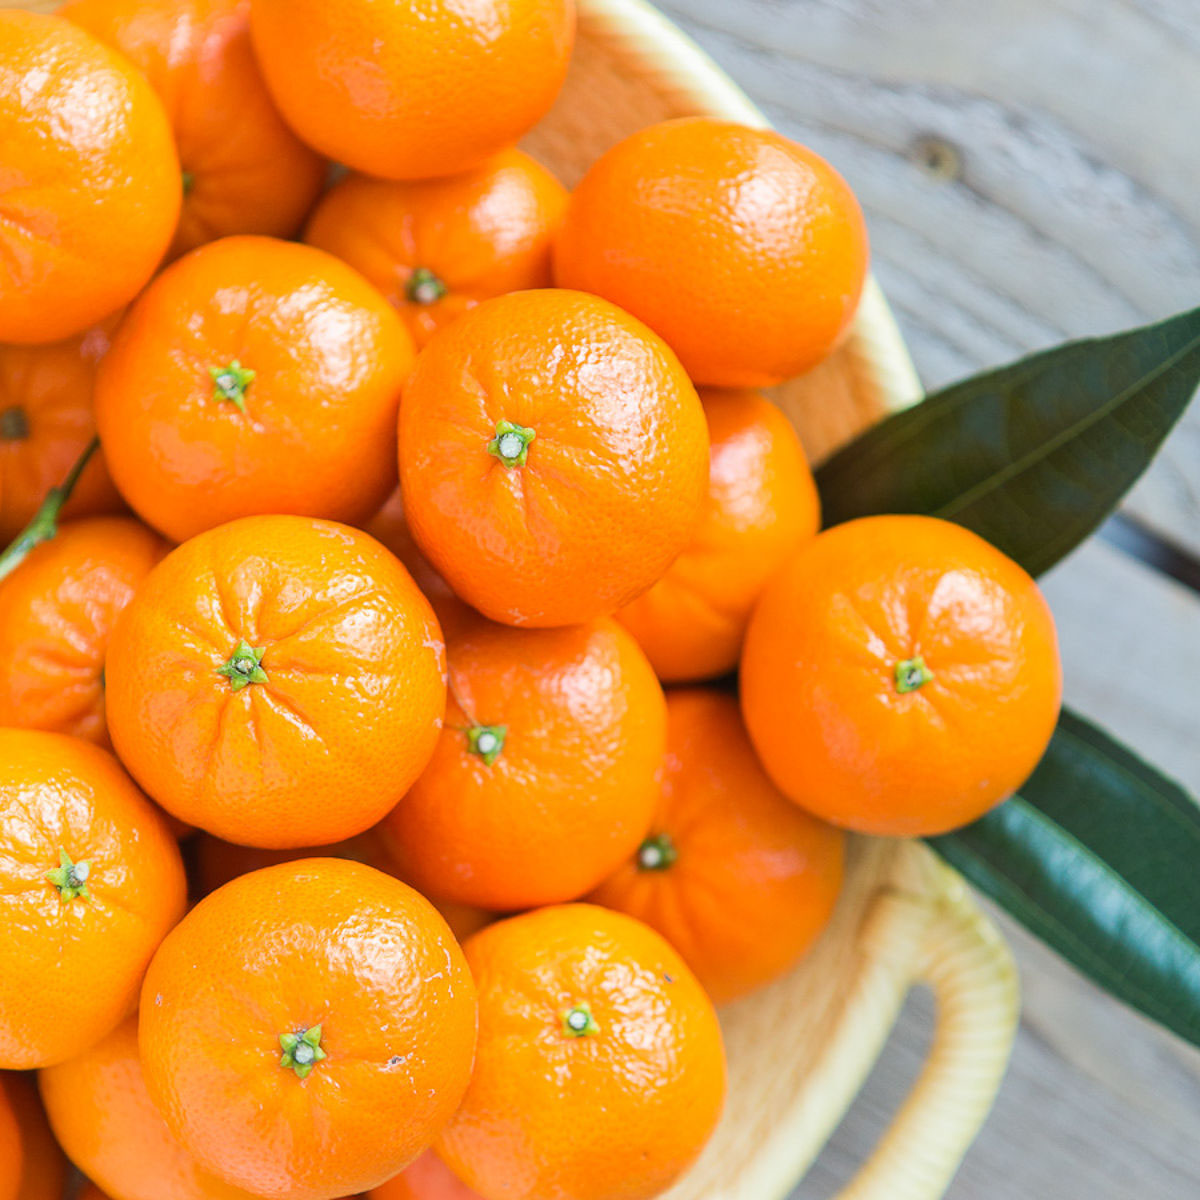 oranges are among the best food for hair growth